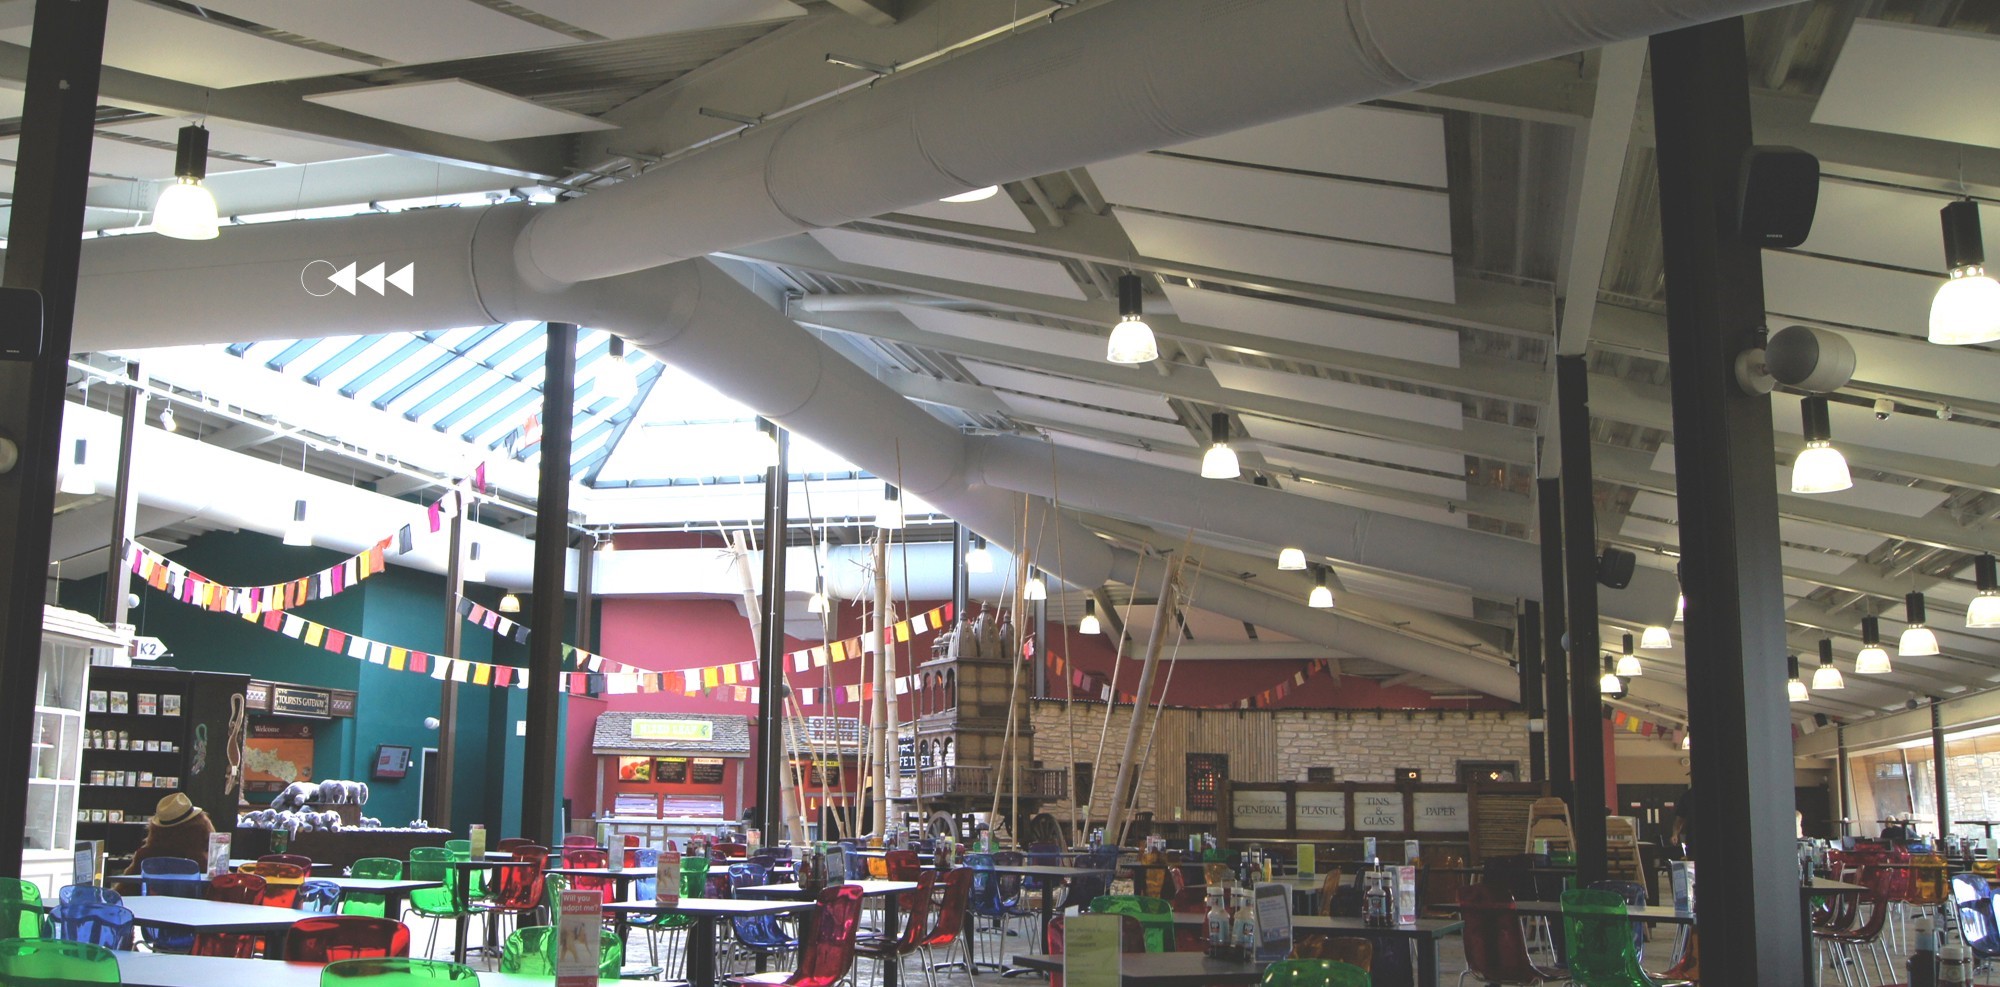 Creating Healthy School Environments with Fabric Ducting